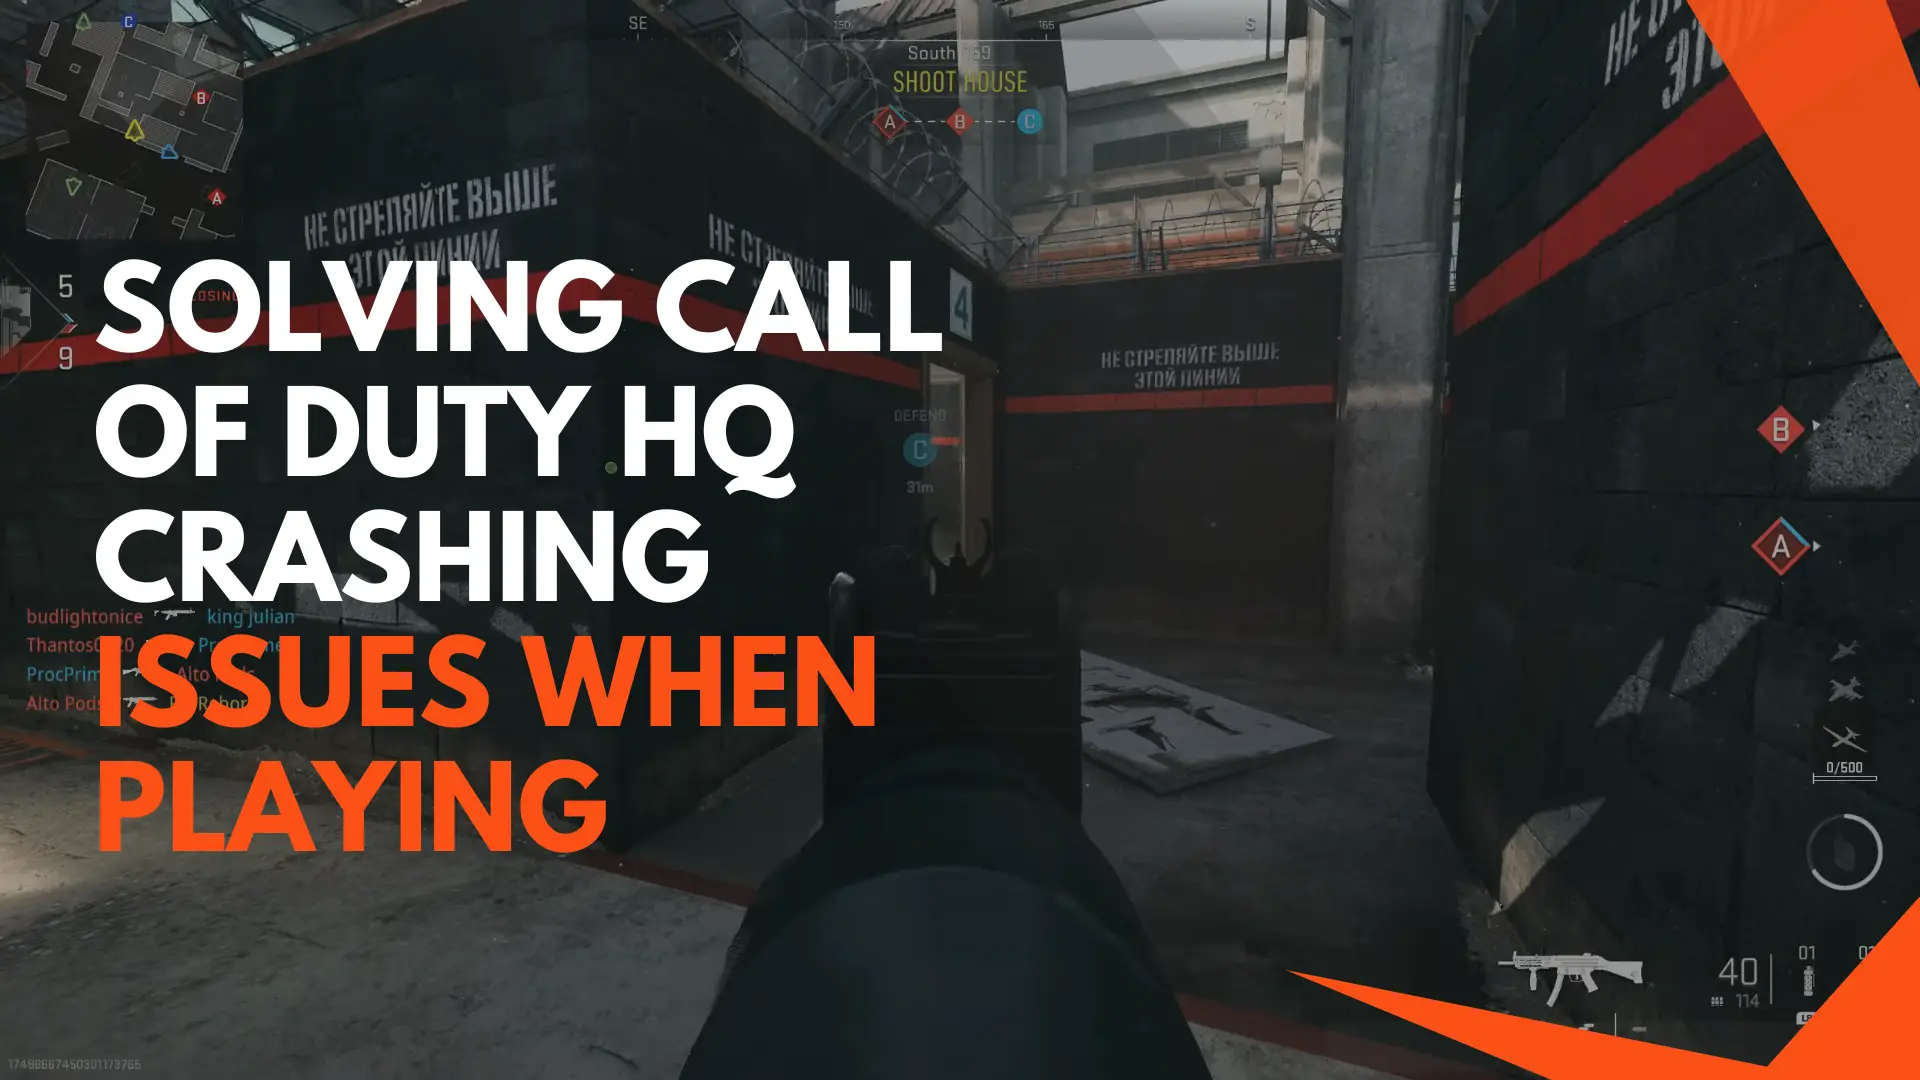 Solving Call of Duty HQ Crashing Issues When Playing